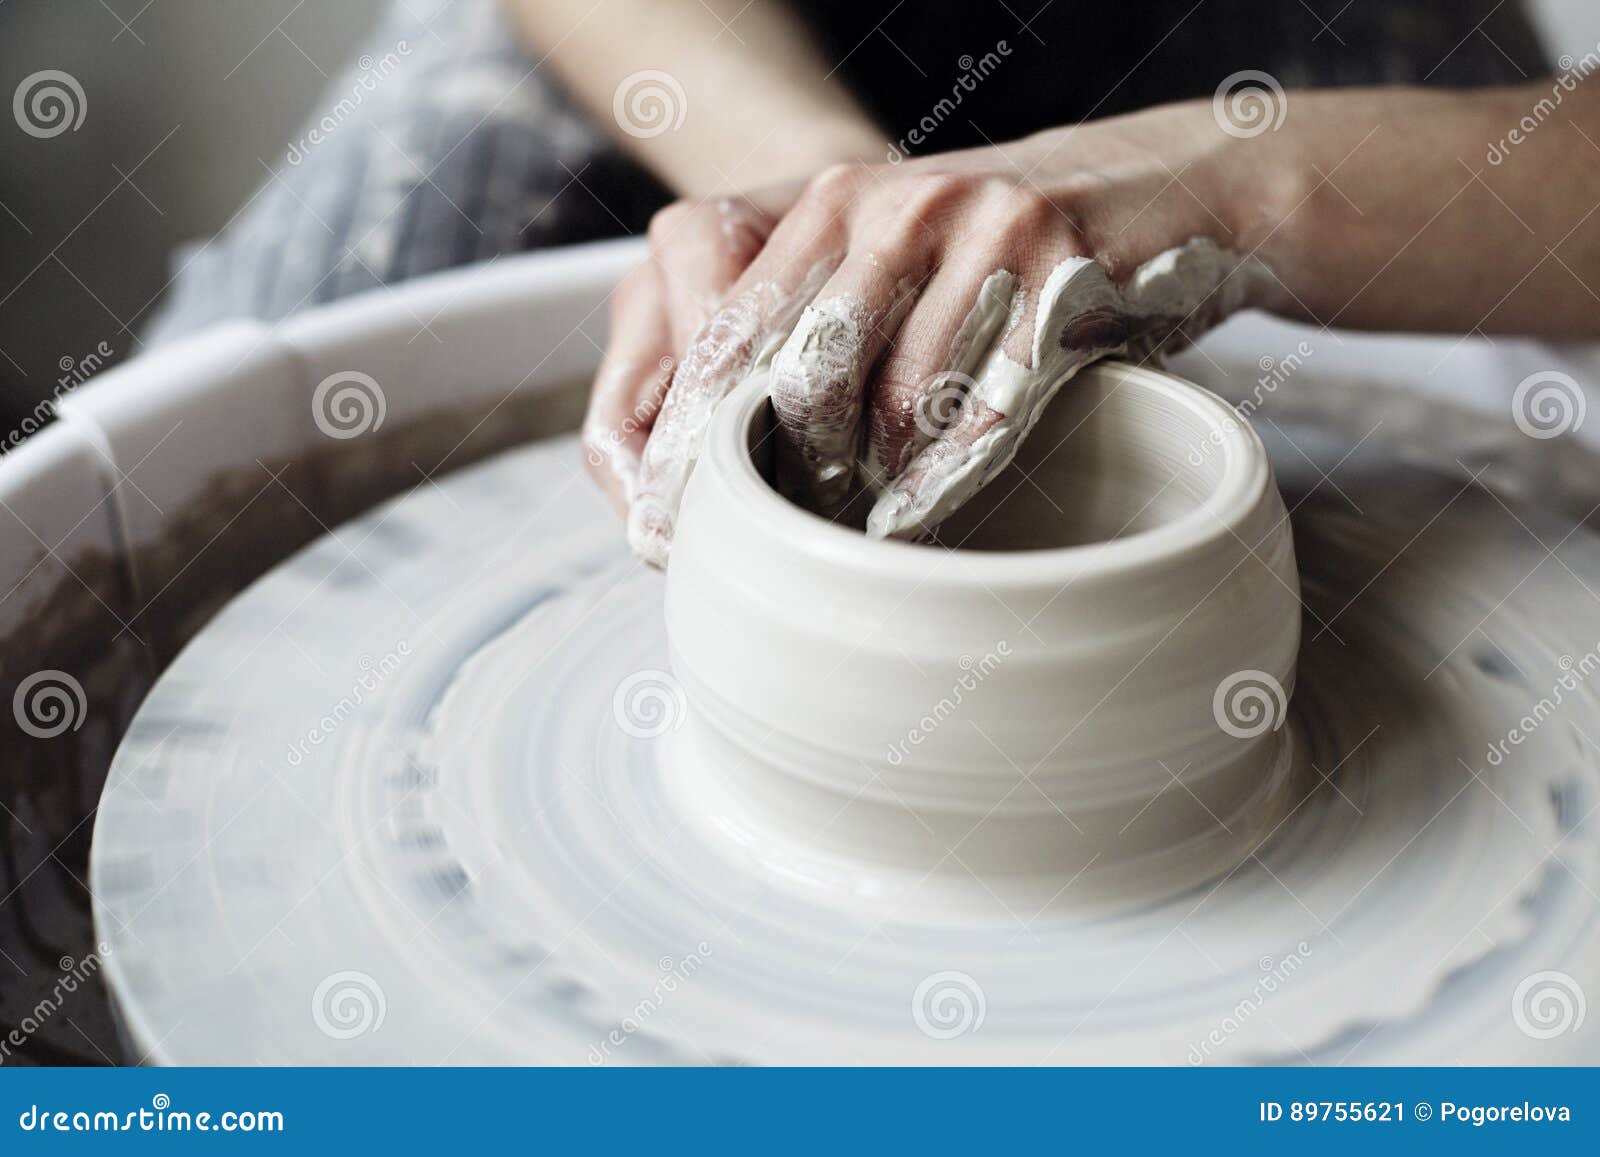 the woman`s hands close up, the masterful studio of ceramics works with clay on a potter`s wheel.